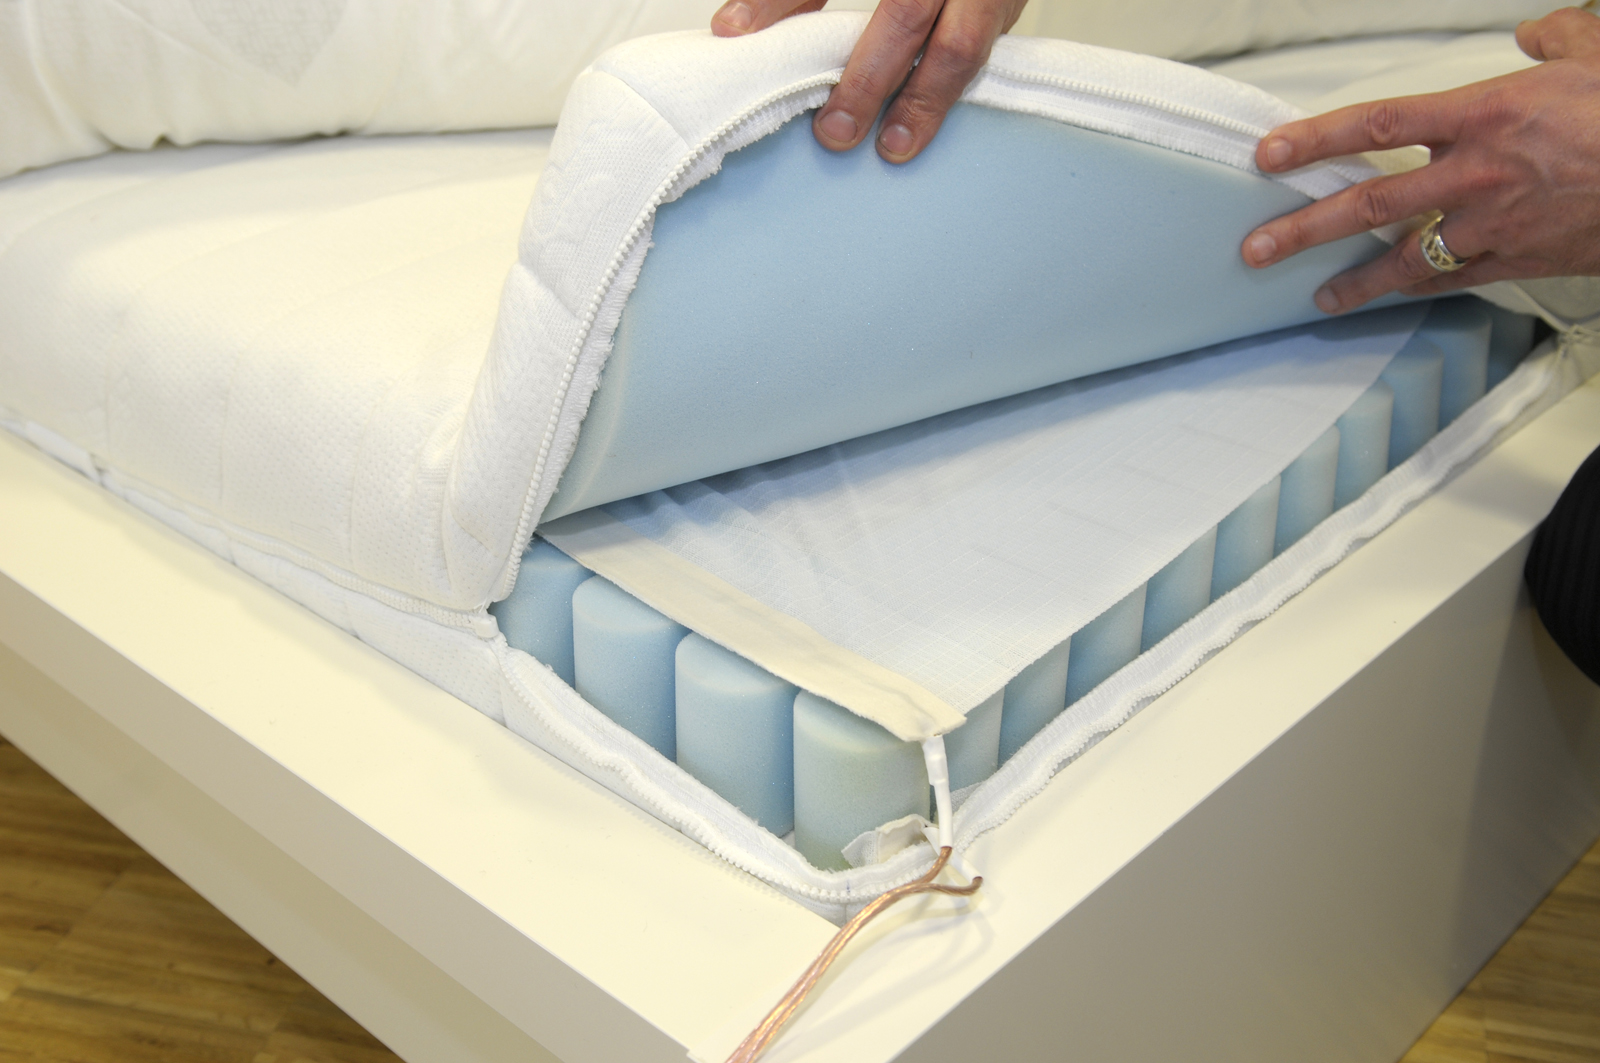 Anti dust mite mattress – a textile heating system creates hygrothermal conditions in which the arachnids never even become established